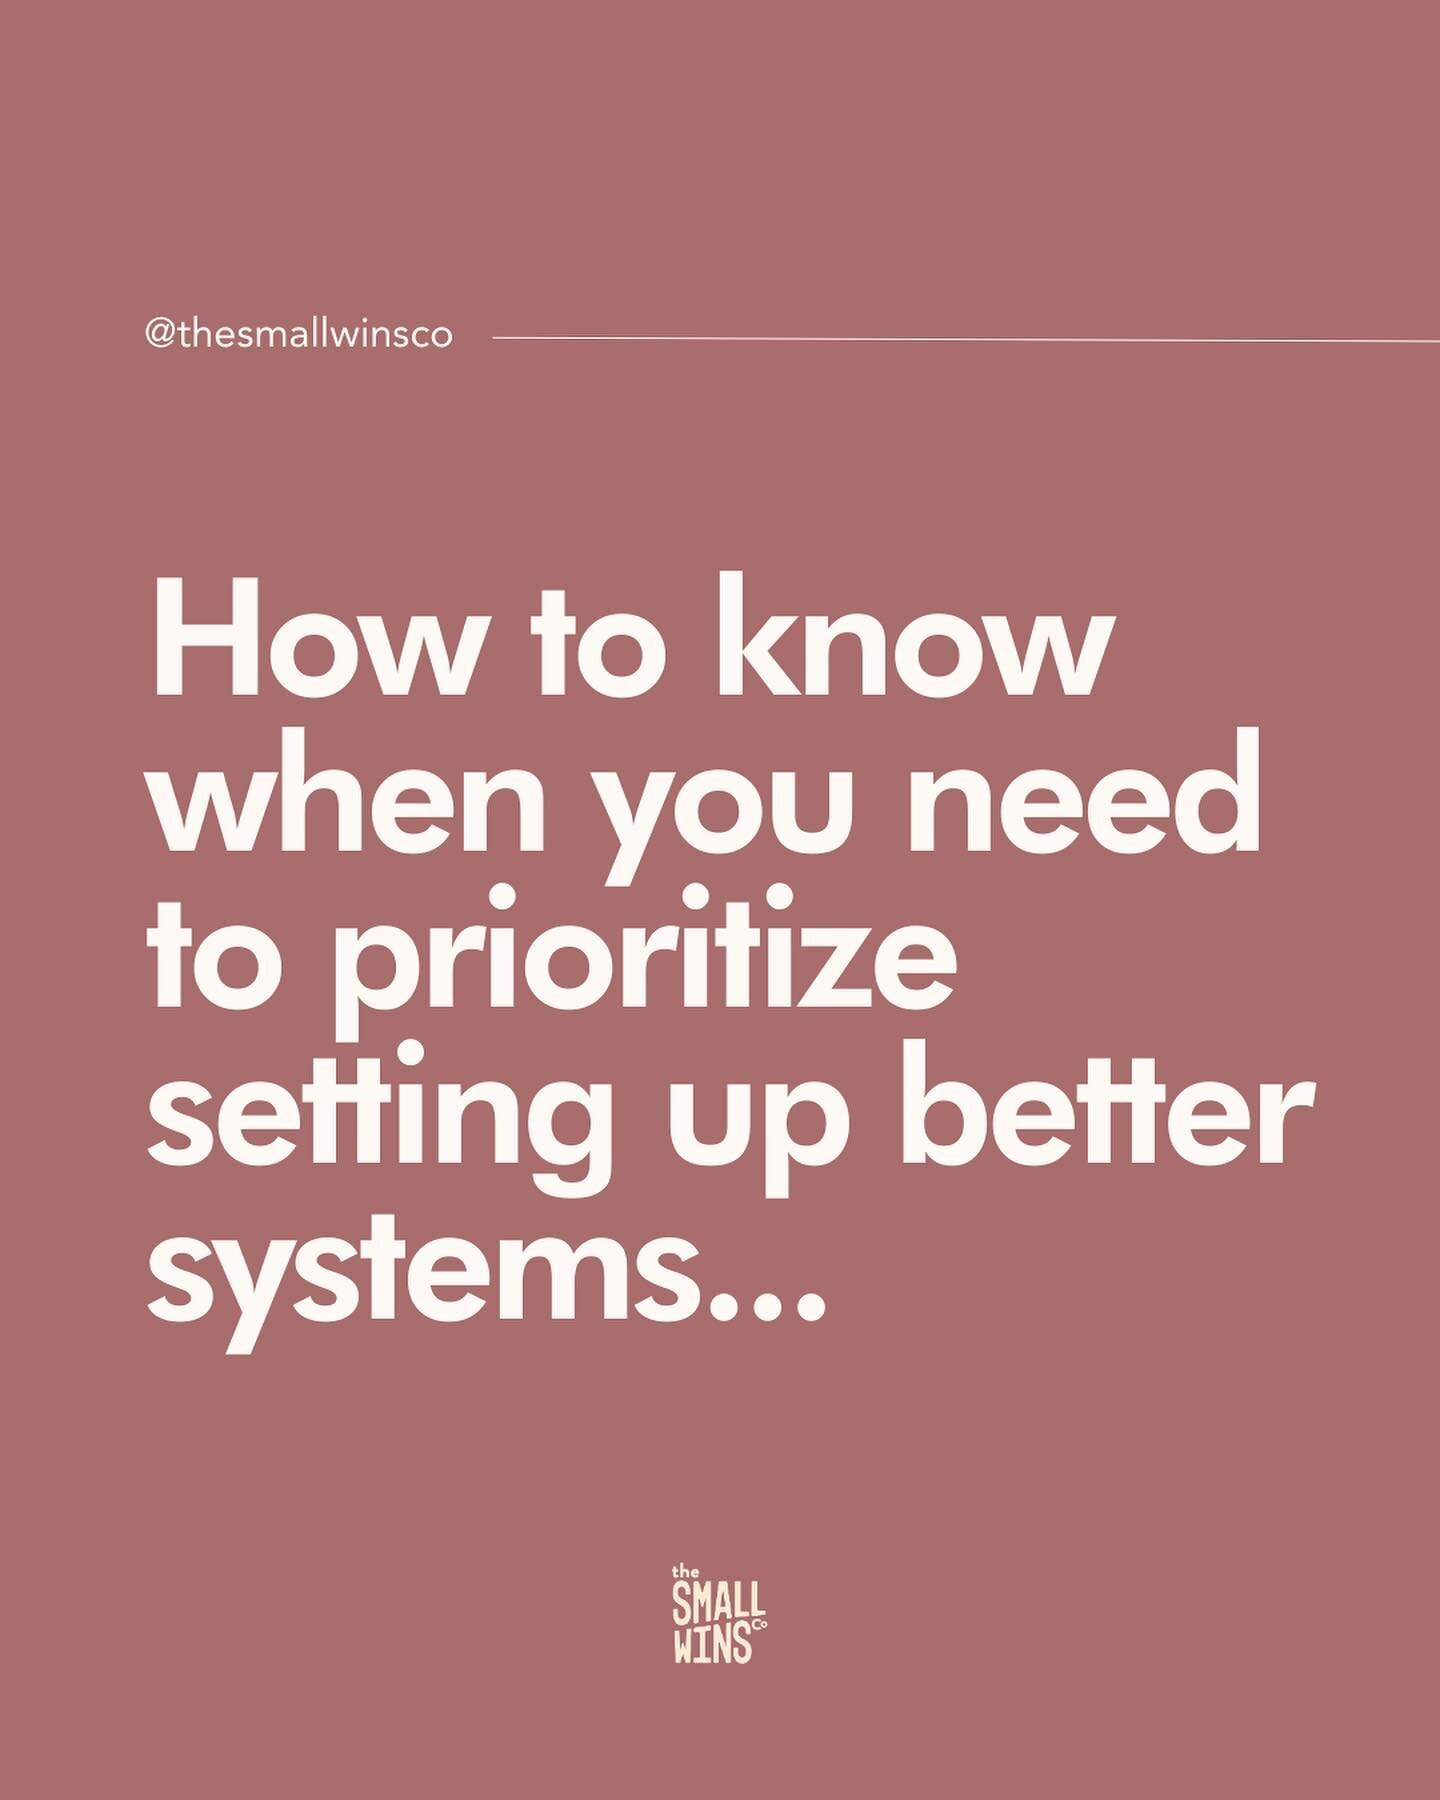 The longer you take to sort your systems, the longer you deny yourself the freedom and flexibility you want from your business.

Instead of putting your systems on the back burner, let&rsquo;s make 2023 the year you *actually* learn how to use them p